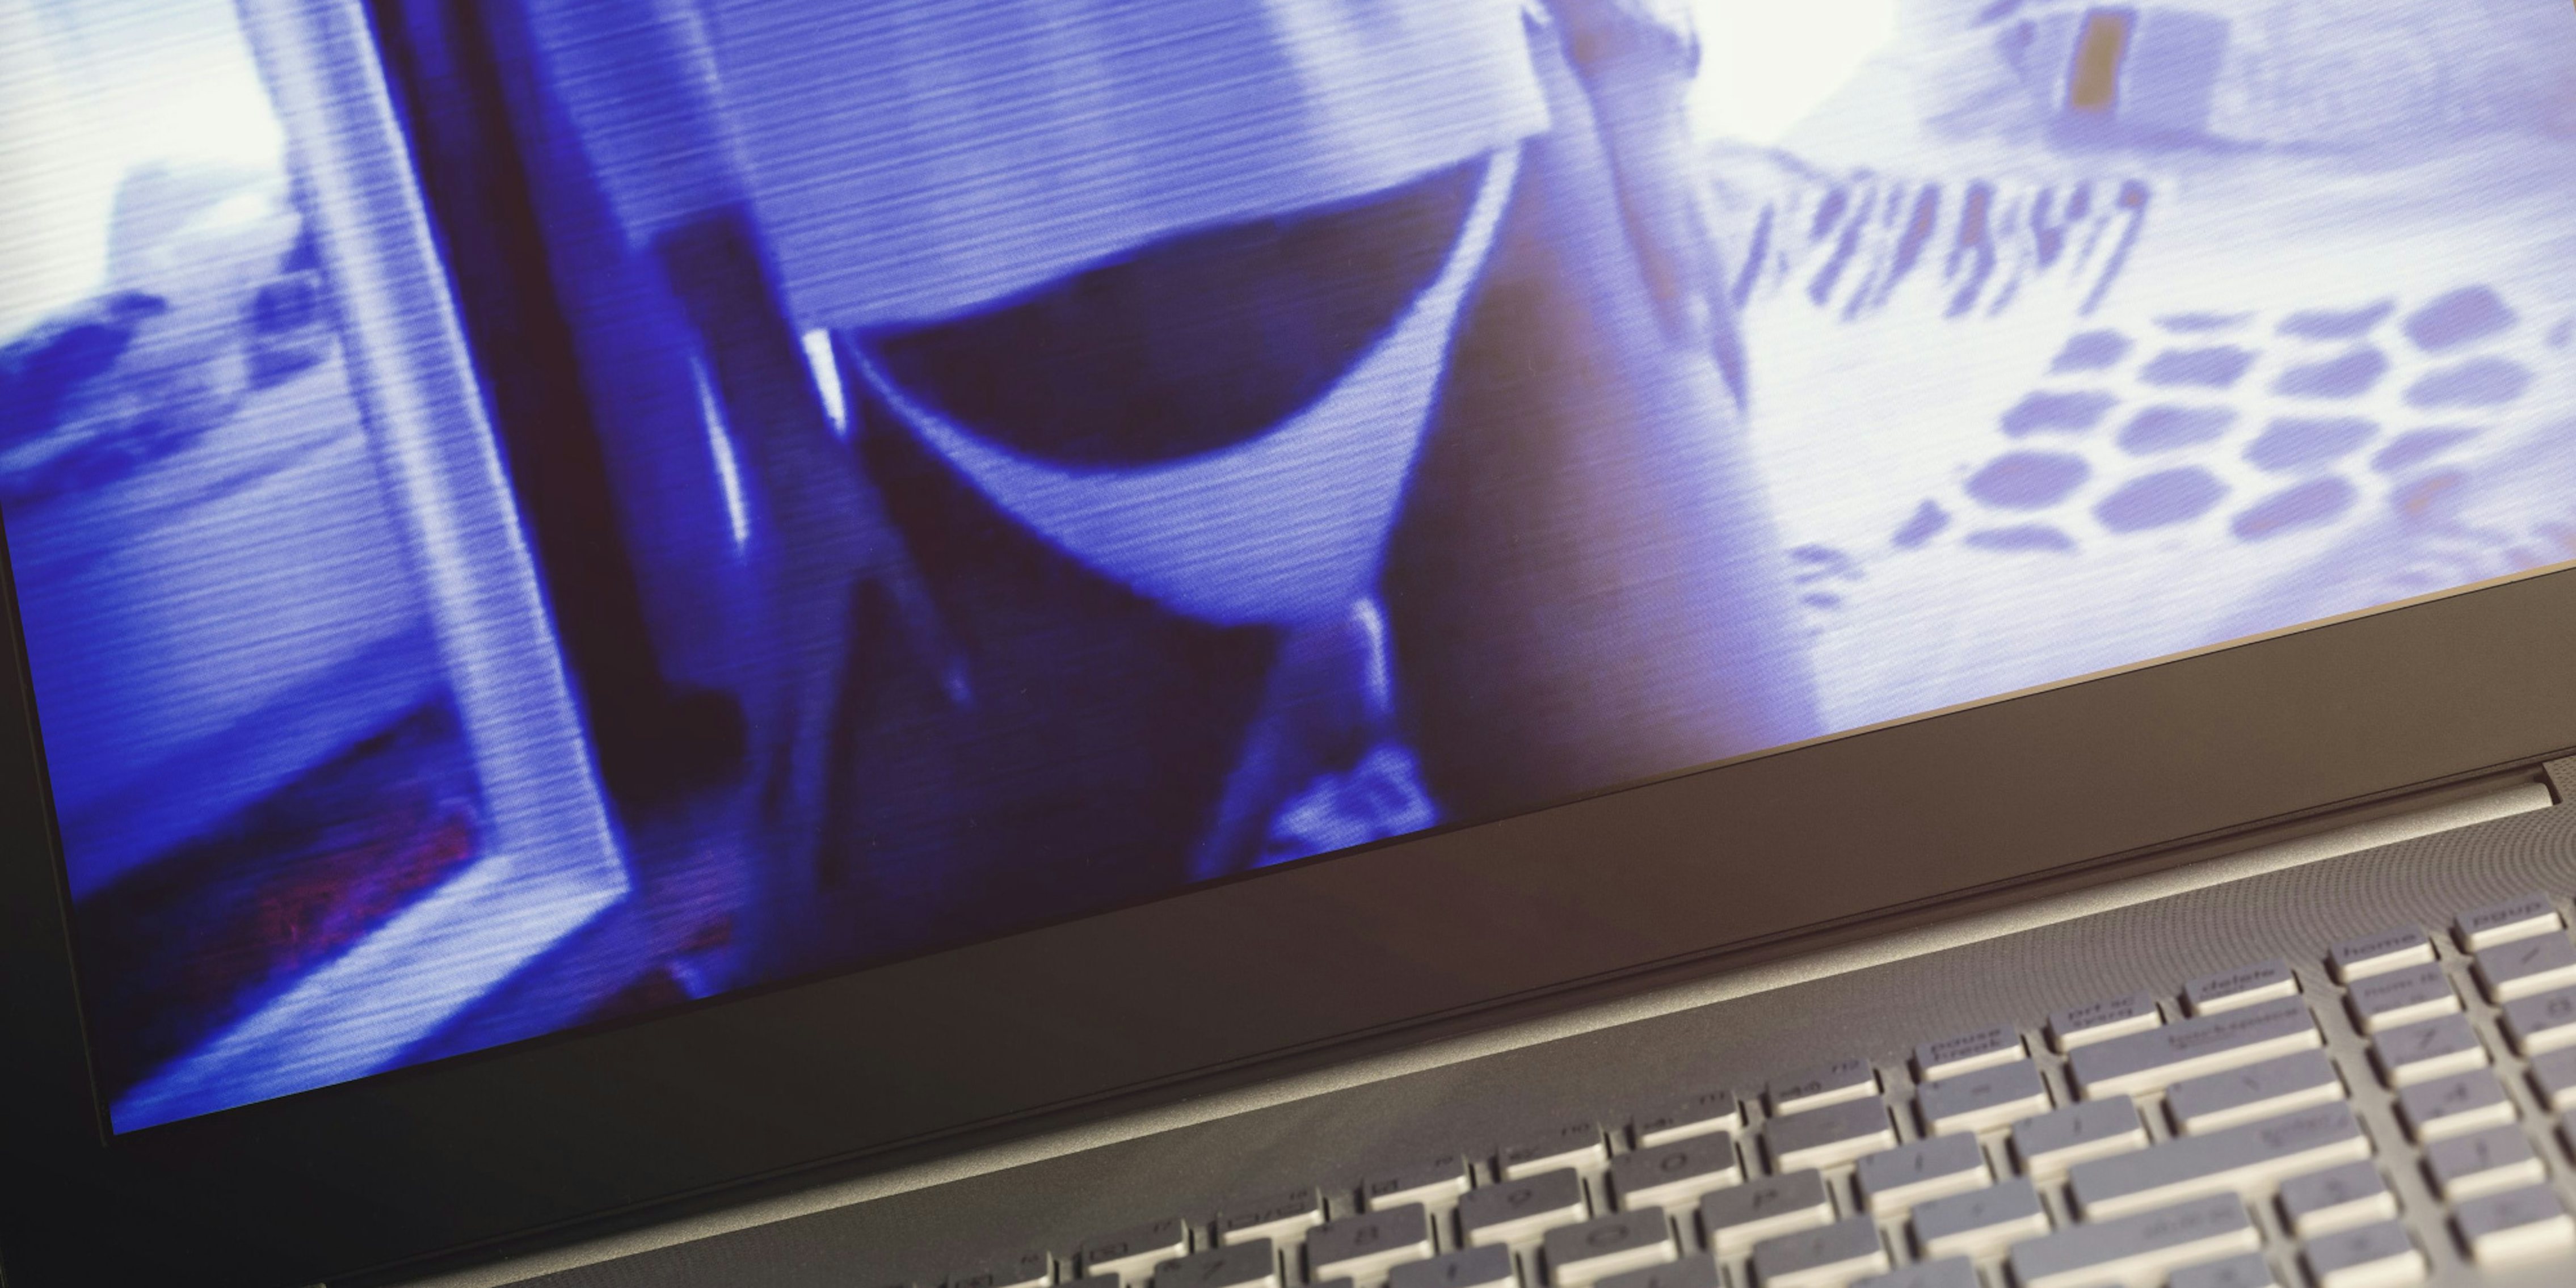 Image showing torso of woman wearing T-shirt and underwear on laptop